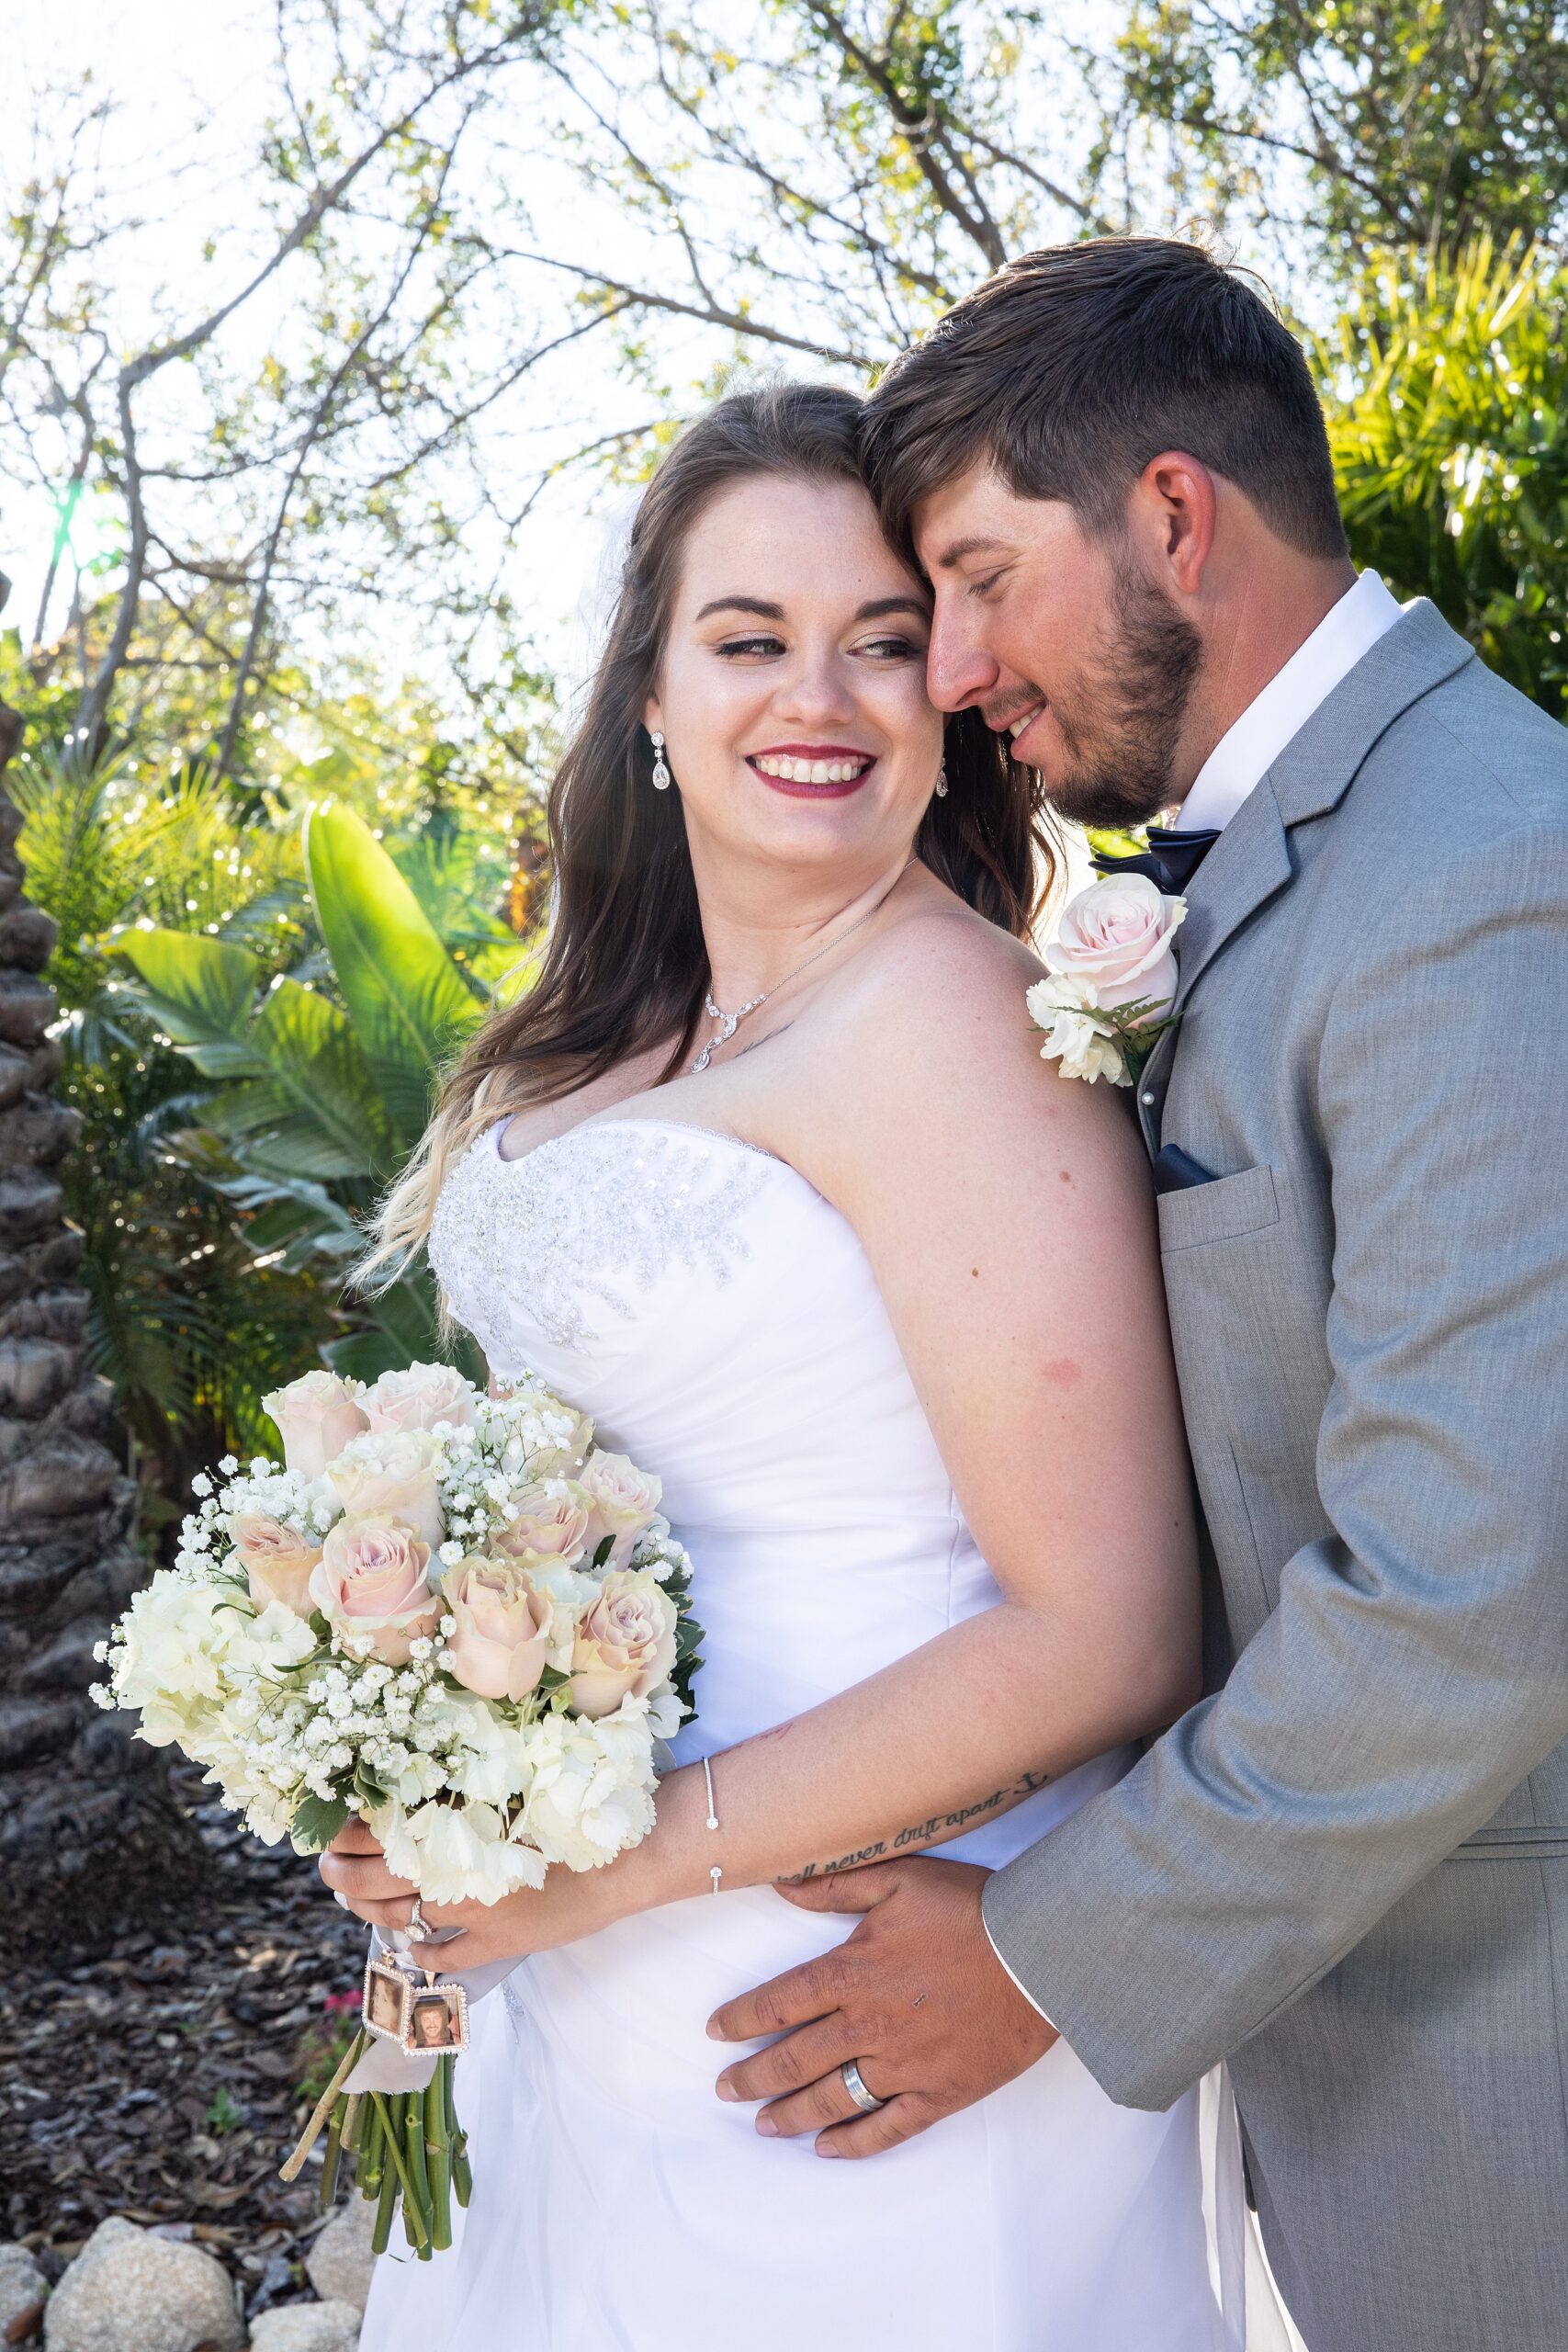 Newlyweds smile while standing close in a tropical garden